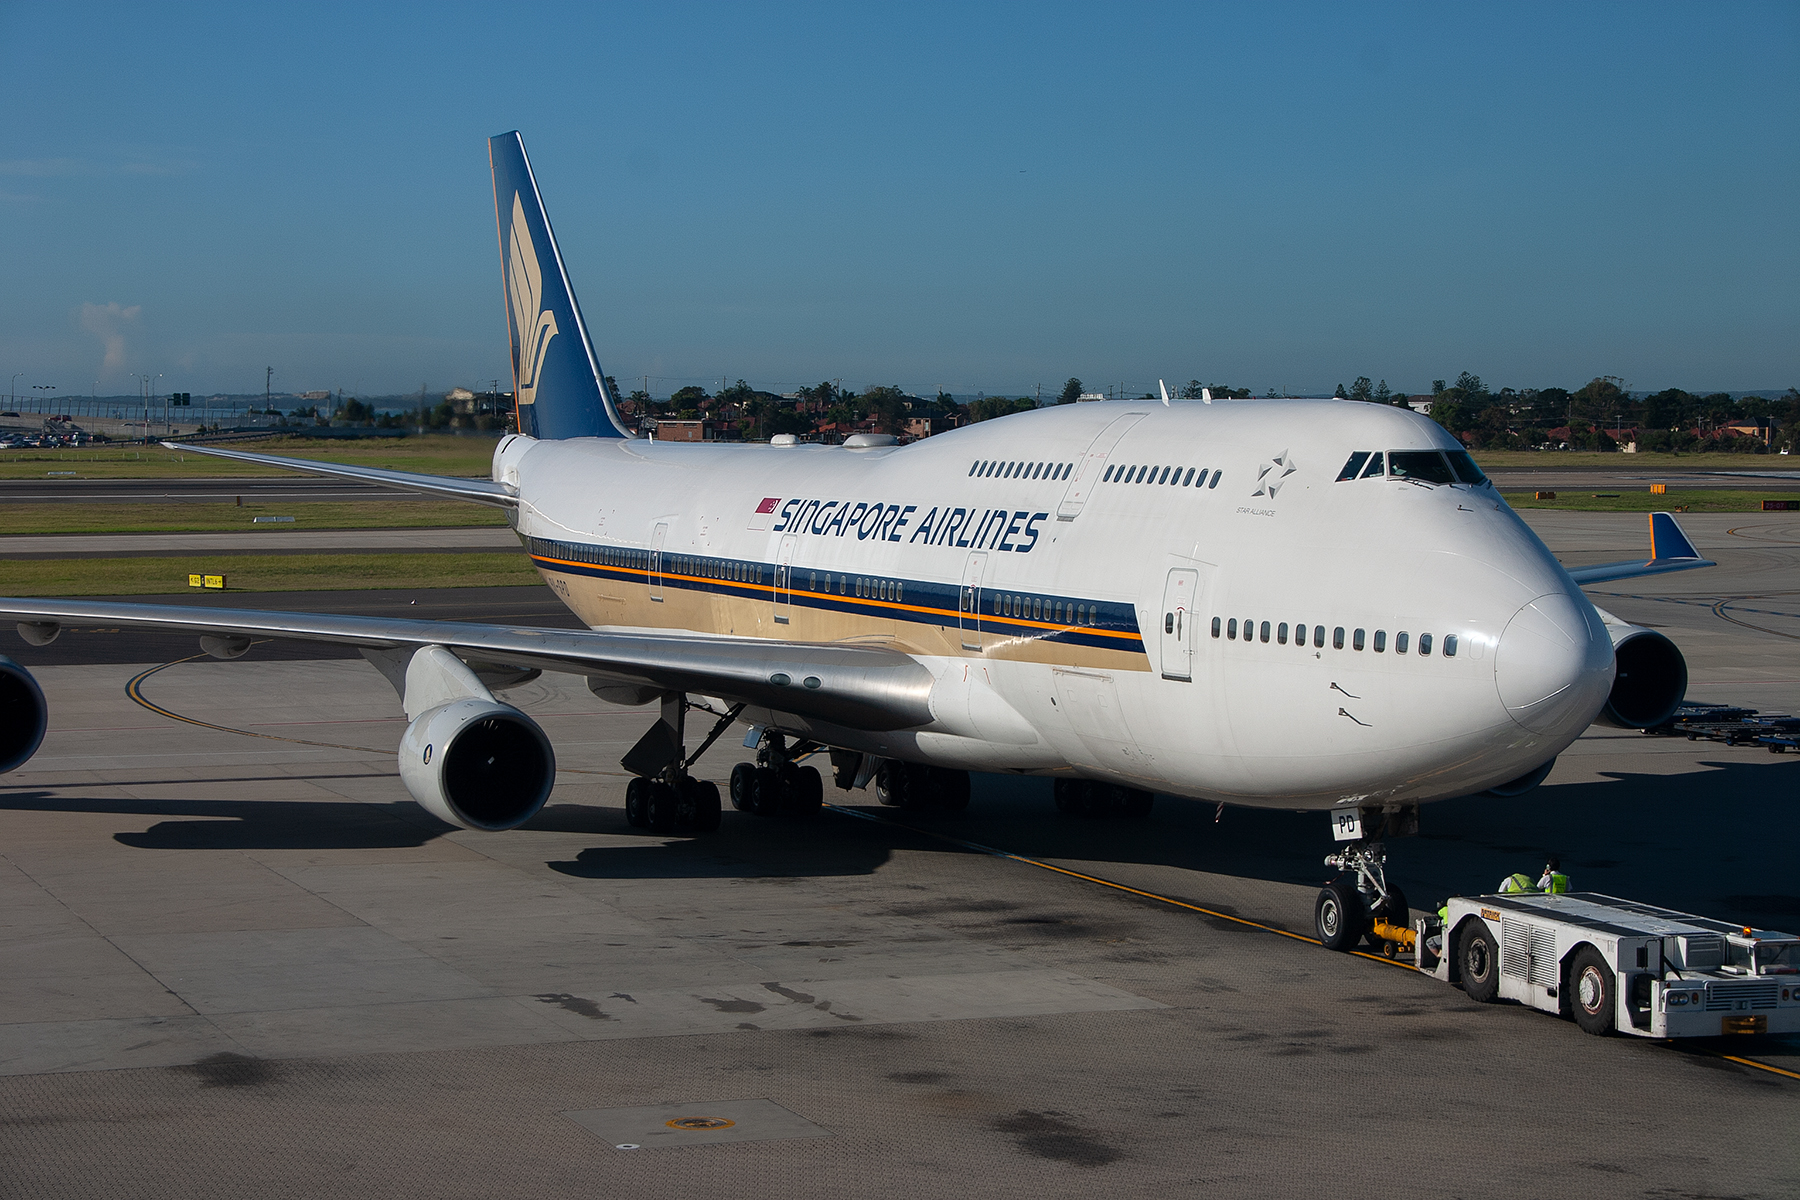 Singapore Airlines Boeing 747-400 9V-SPD at Kingsford Smith